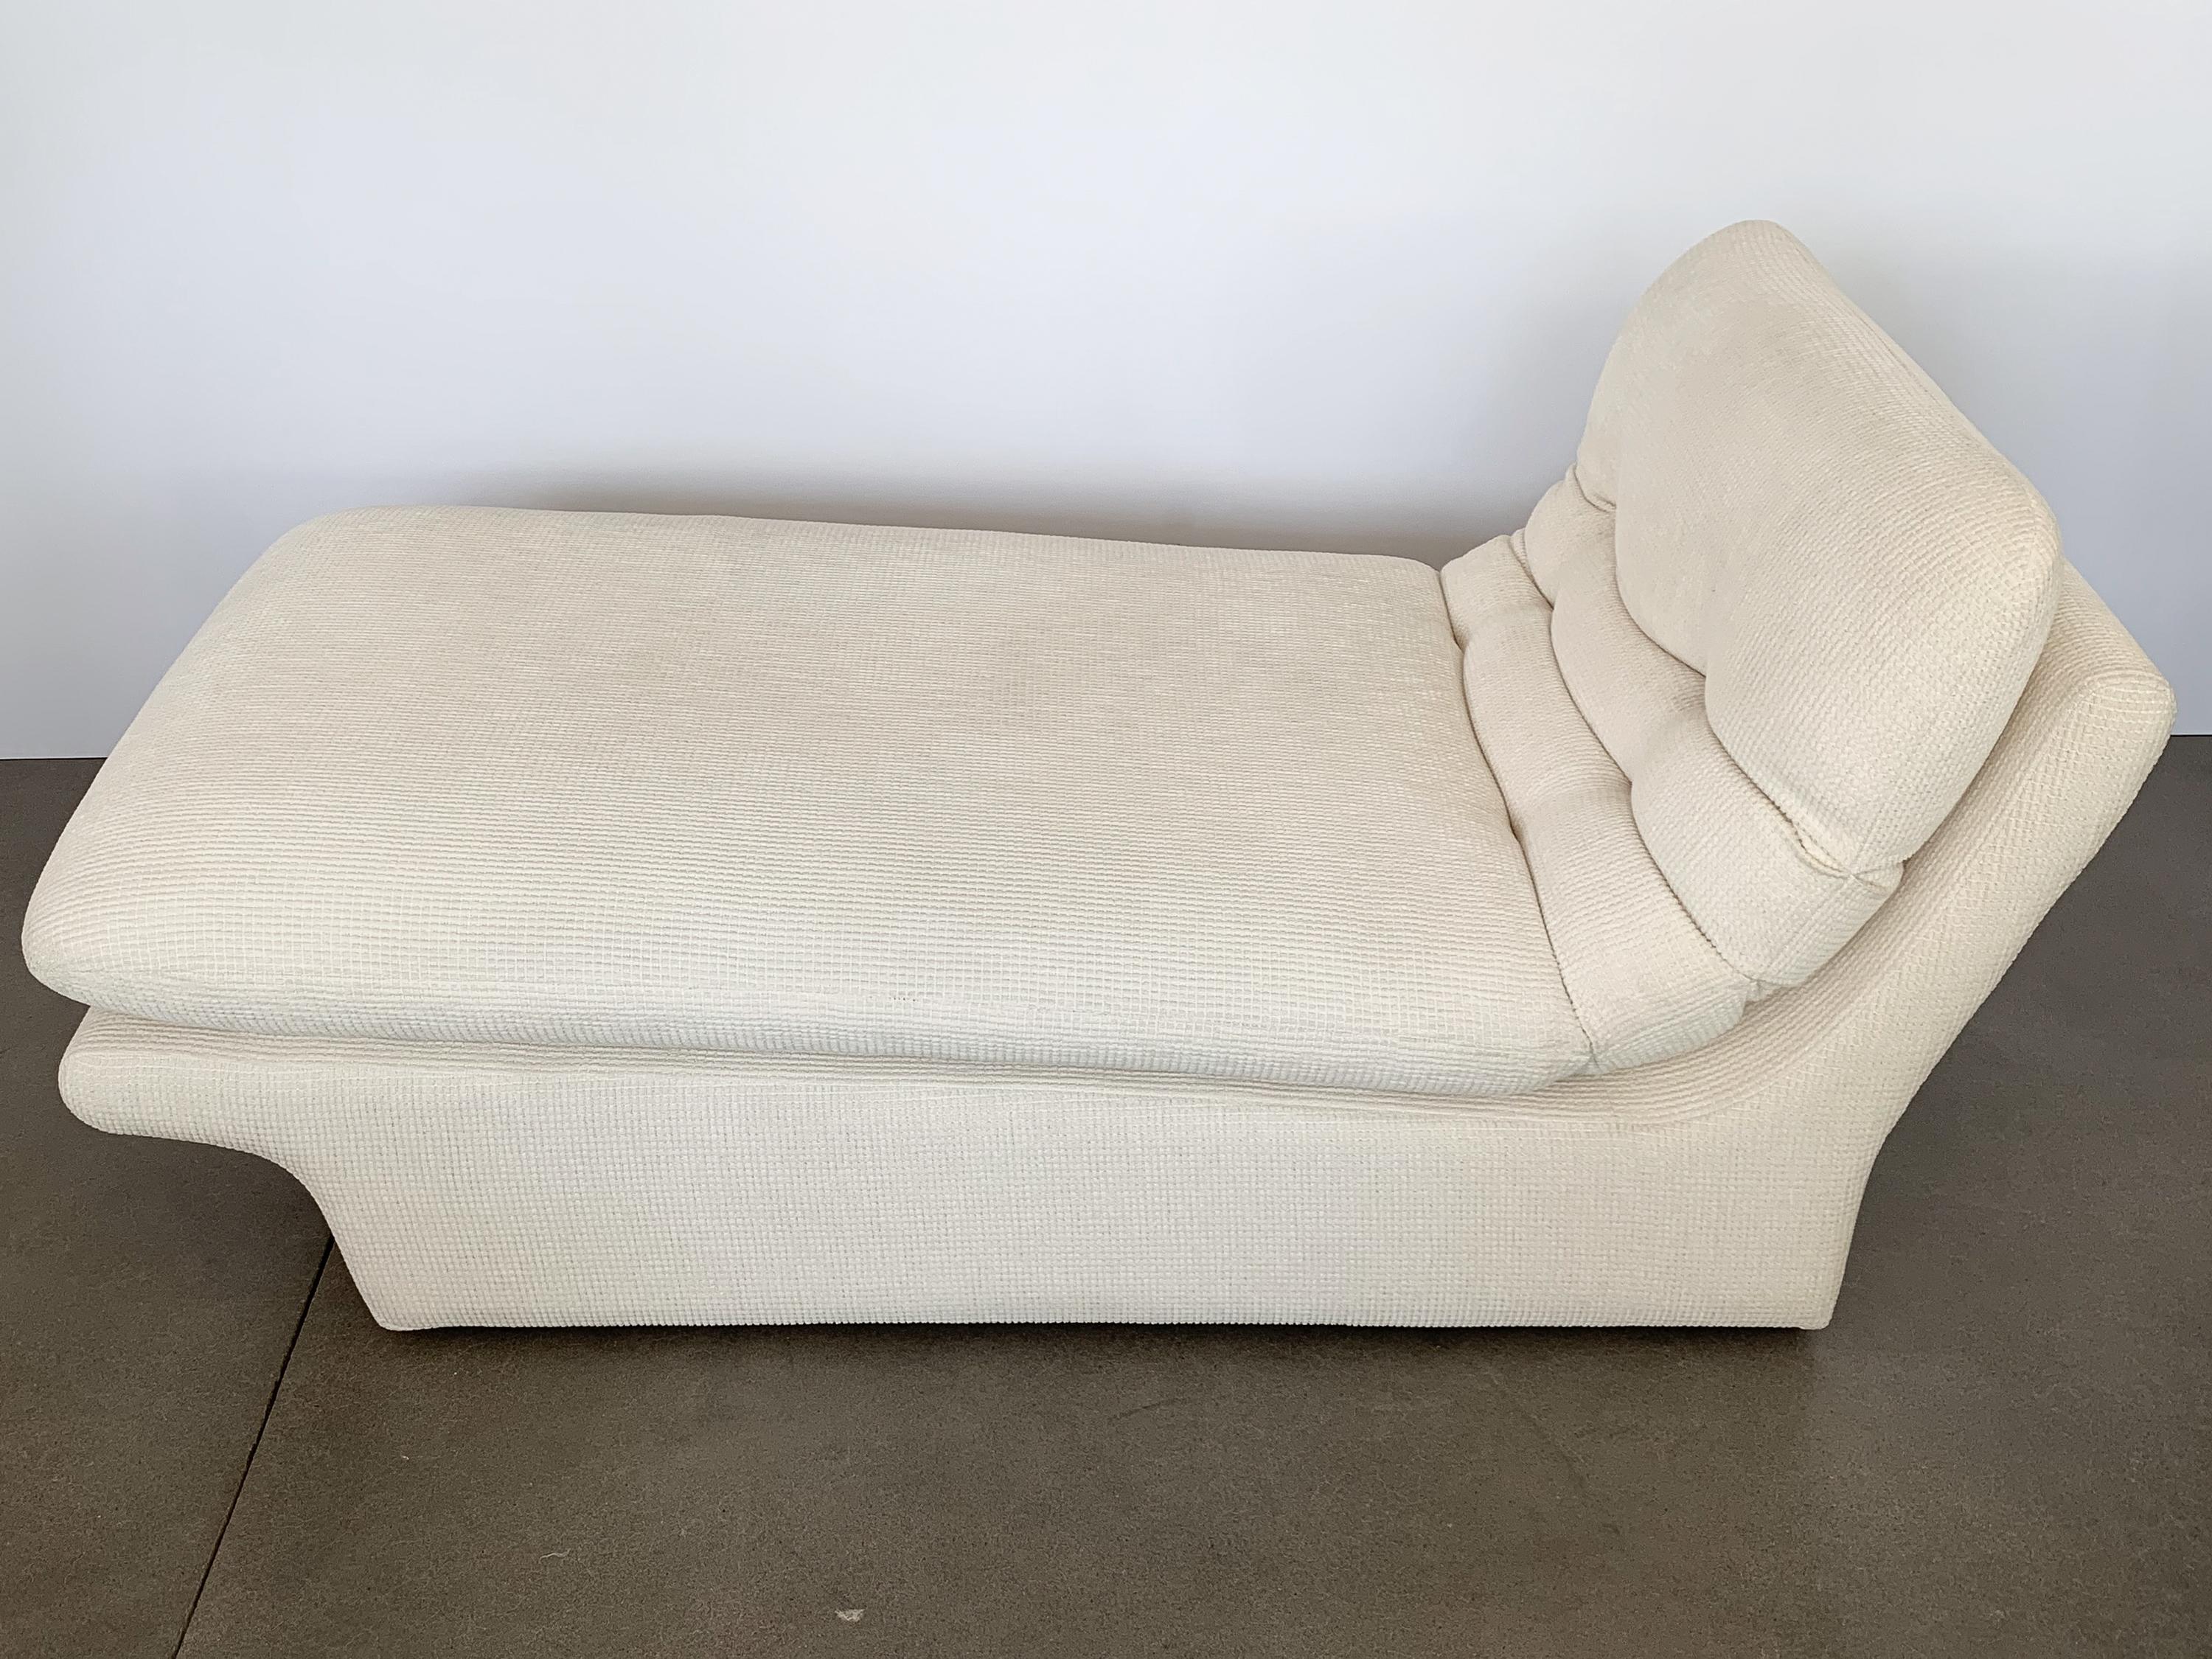 Modernist Kagan style chaise lounge by Preview, circa 1980s. Single loose cushion with channels and tufted buttons sits on a fully upholstered curved sculptural base. This chaise lounge is in very good vintage condition. Light wear and slight fading